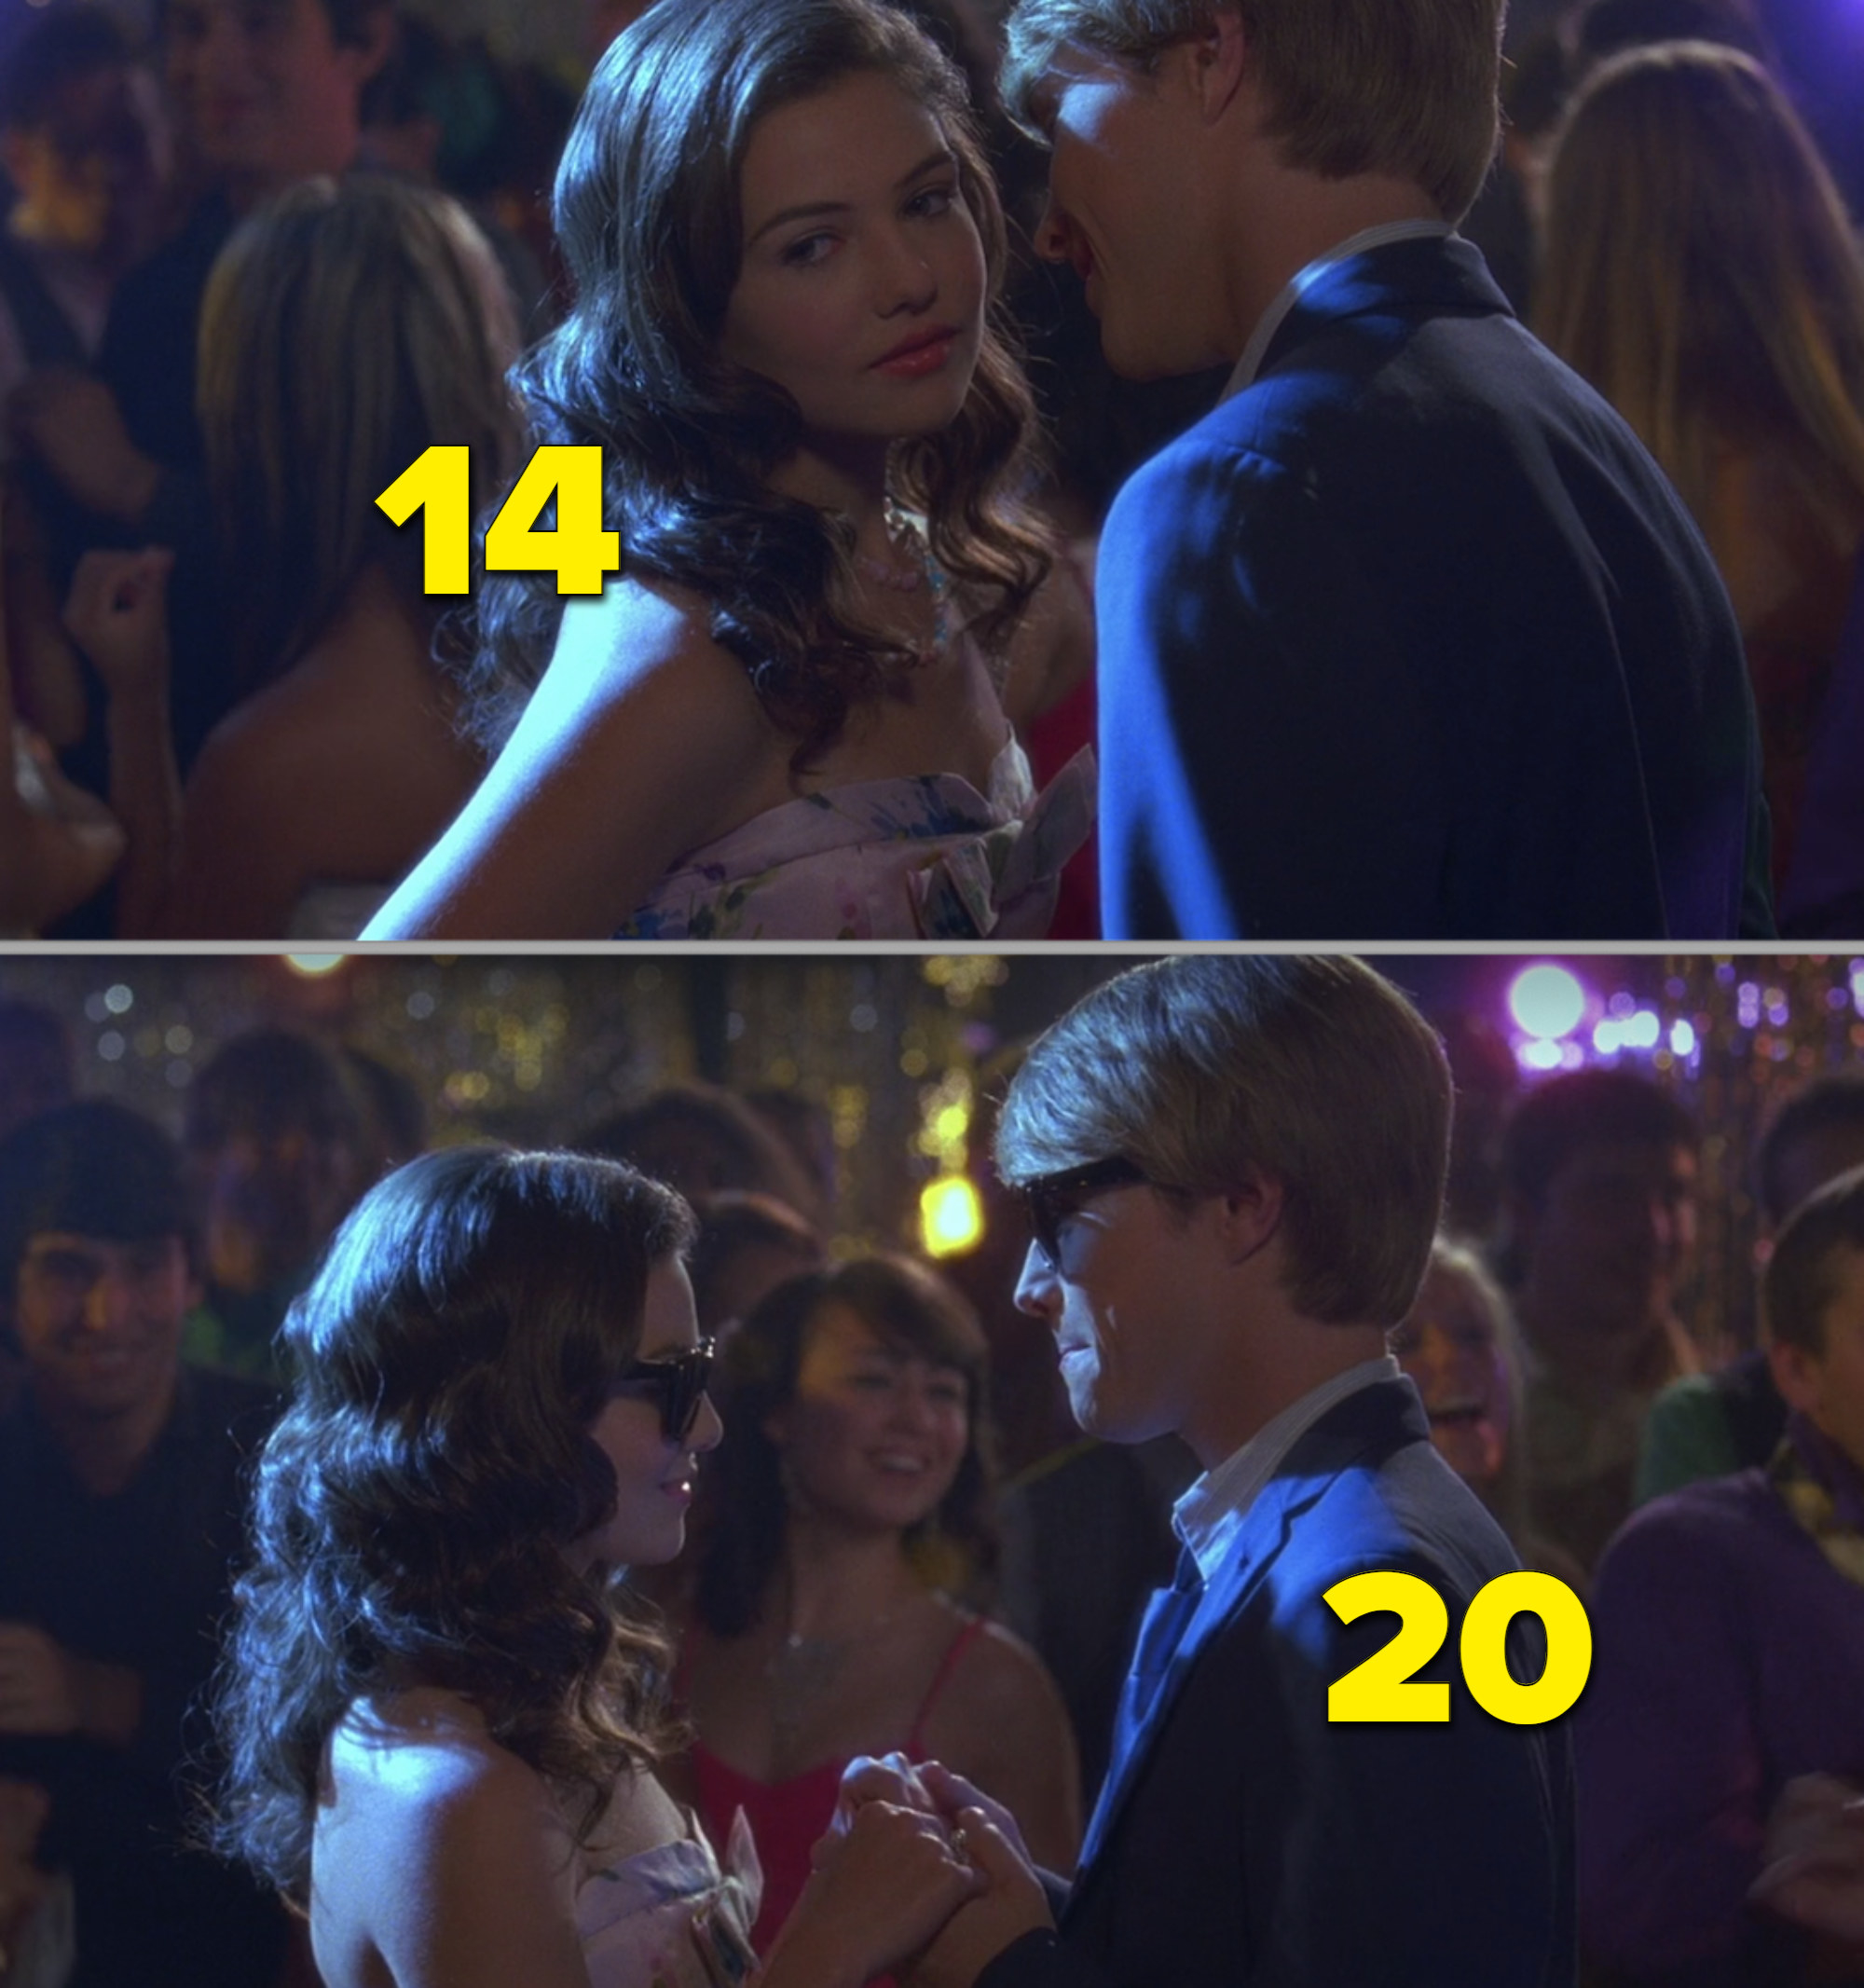 The two actors slow dancing and almost kissing at a school dance